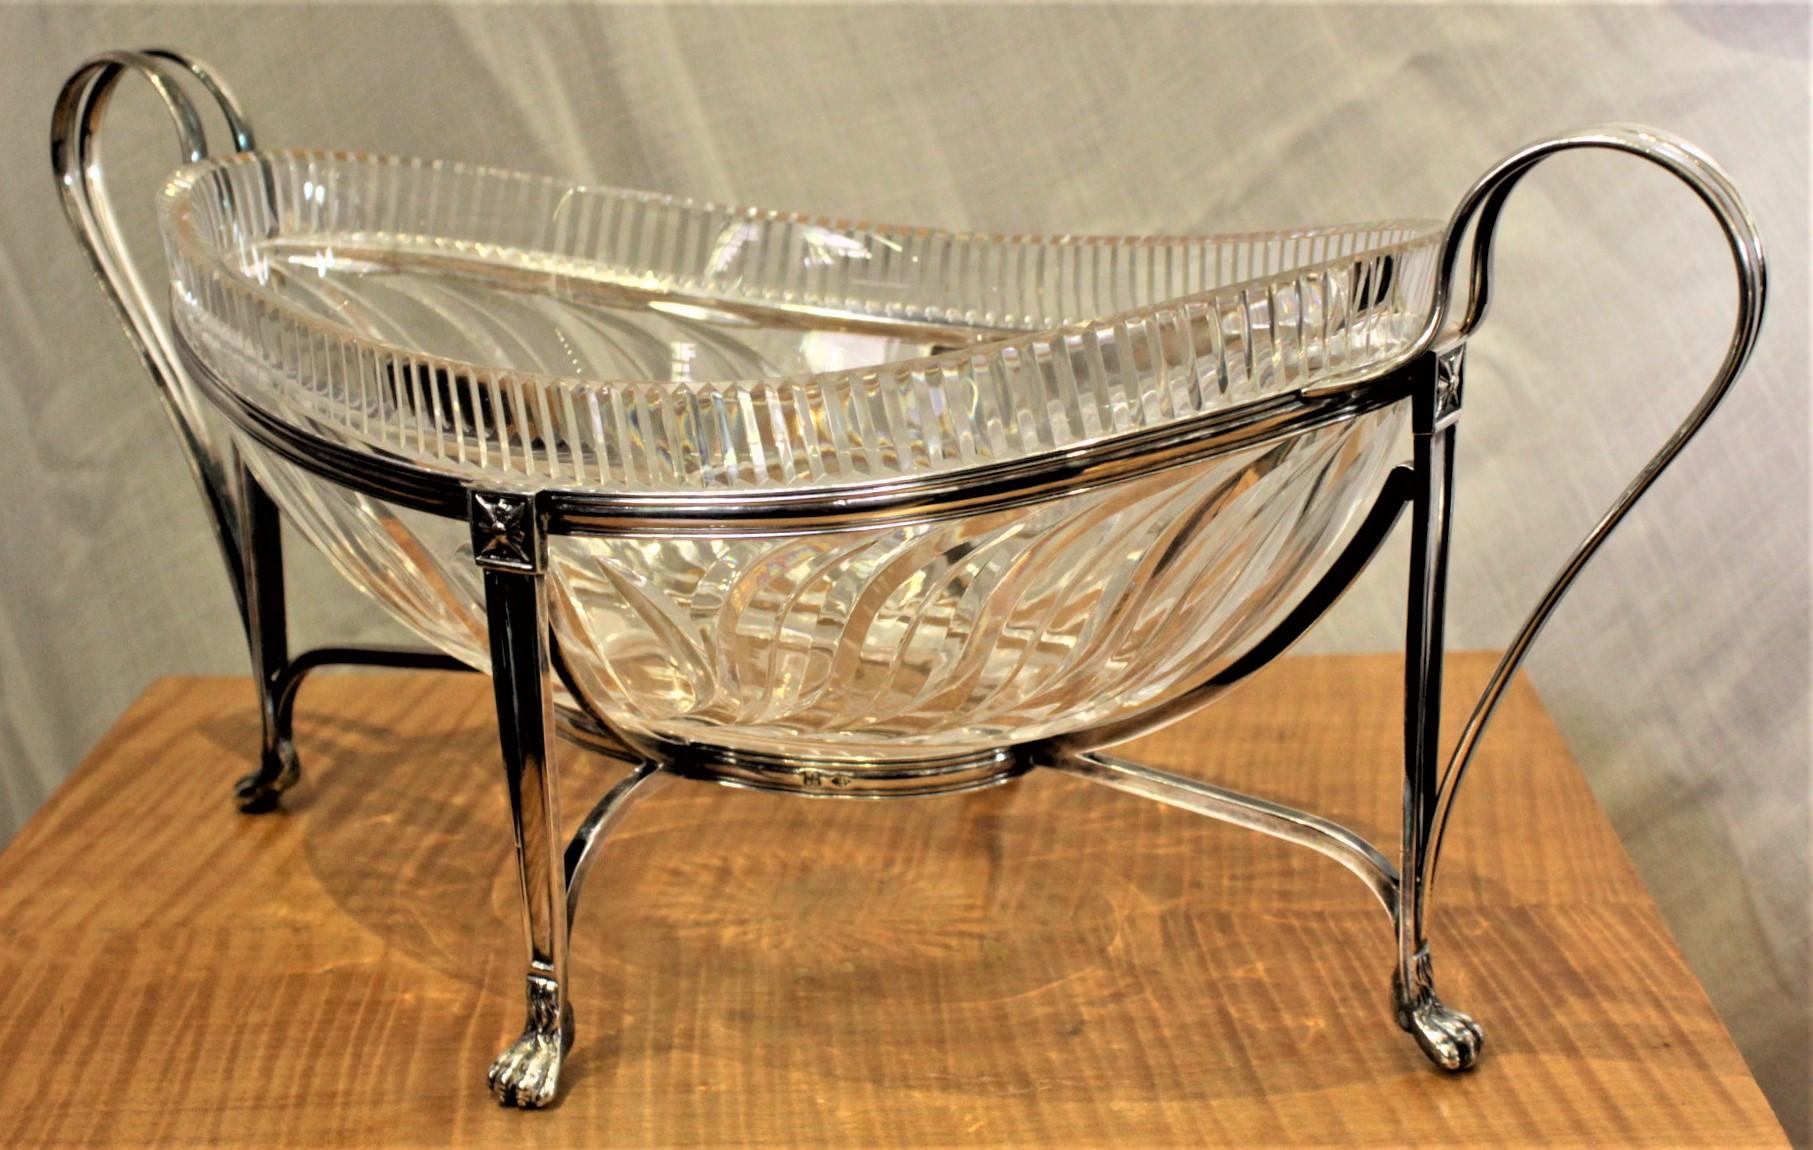 Hand-Carved Antique Anglo-Irish Cut Crystal Centerpiece Bowl with Silver Plated Stand For Sale